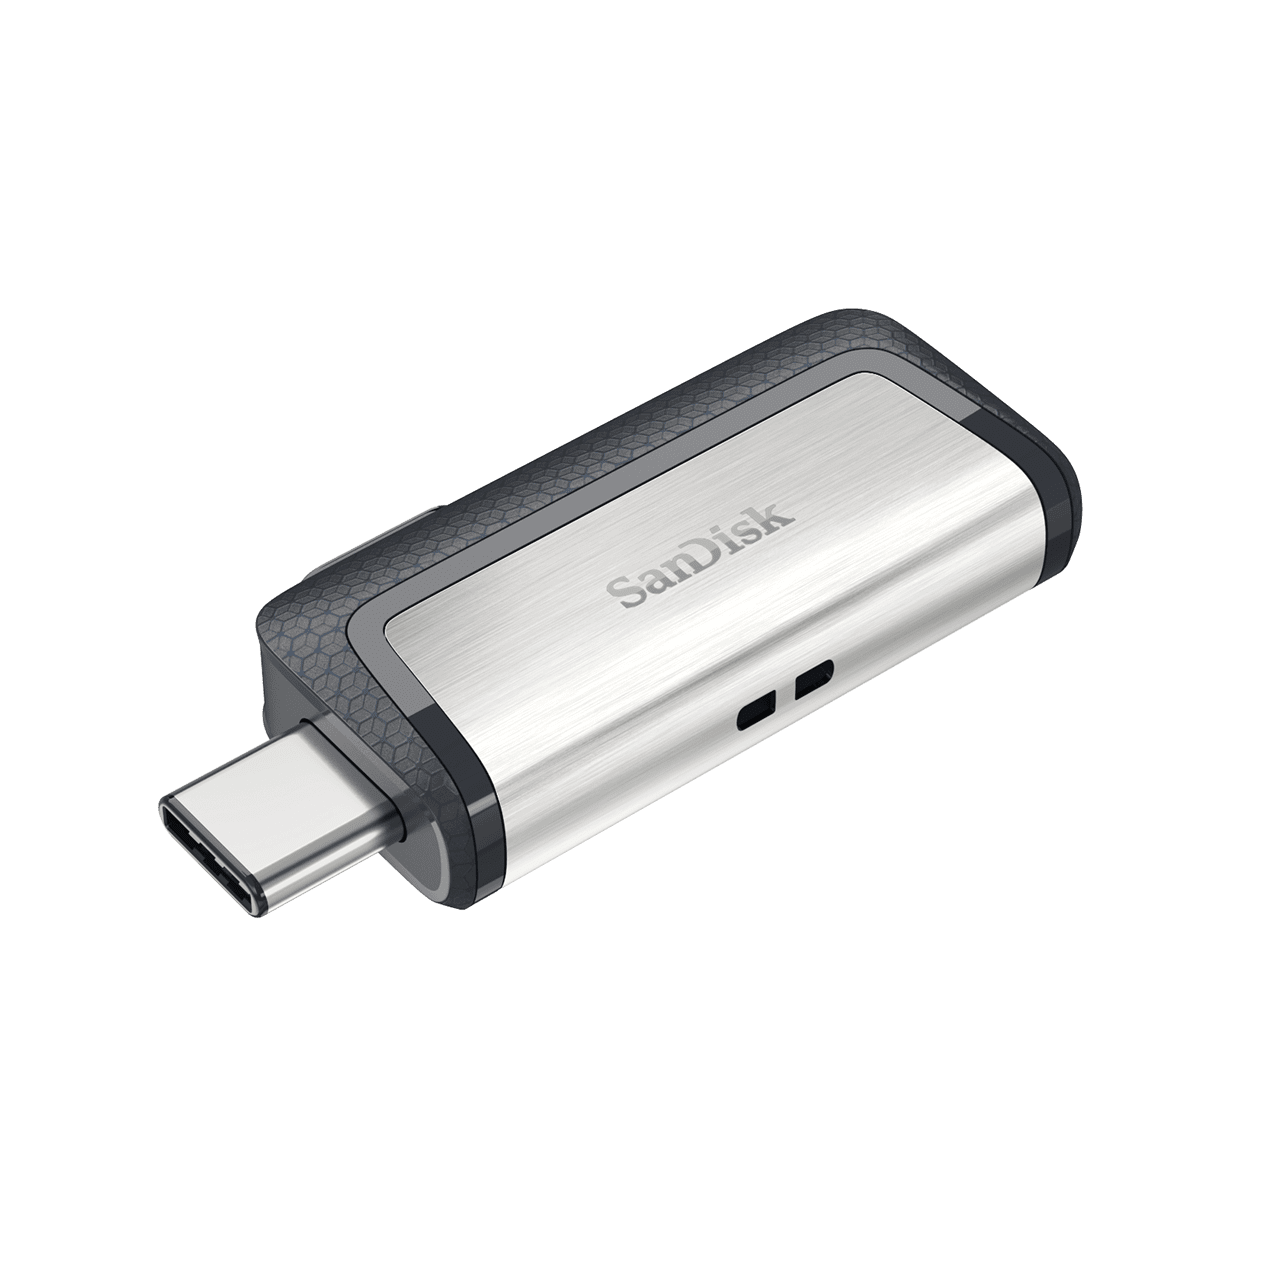 SanDisk Ultra Dual Drive OTG USB 3.1 Type-C ( SDDDC2 Series )with High Speed Transfer, Compact Size, Slide Design, SanDisk Memory Zone APP Support, Strap Hole (16GB / 32GB / 64GB / 128GB / 256GB)